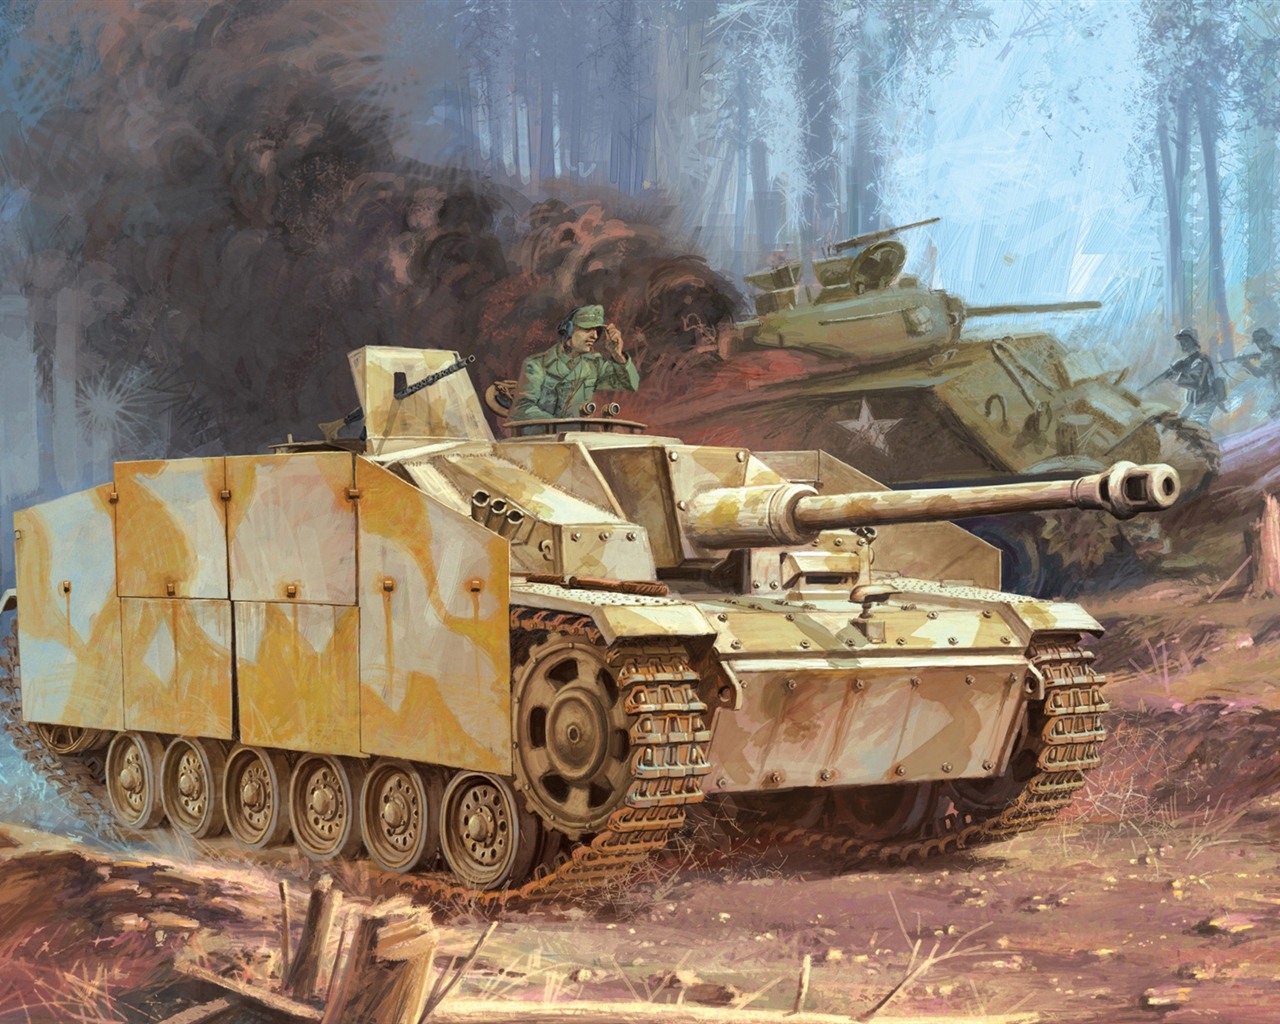 Military tanks, armored HD painting wallpapers #3 - 1280x1024